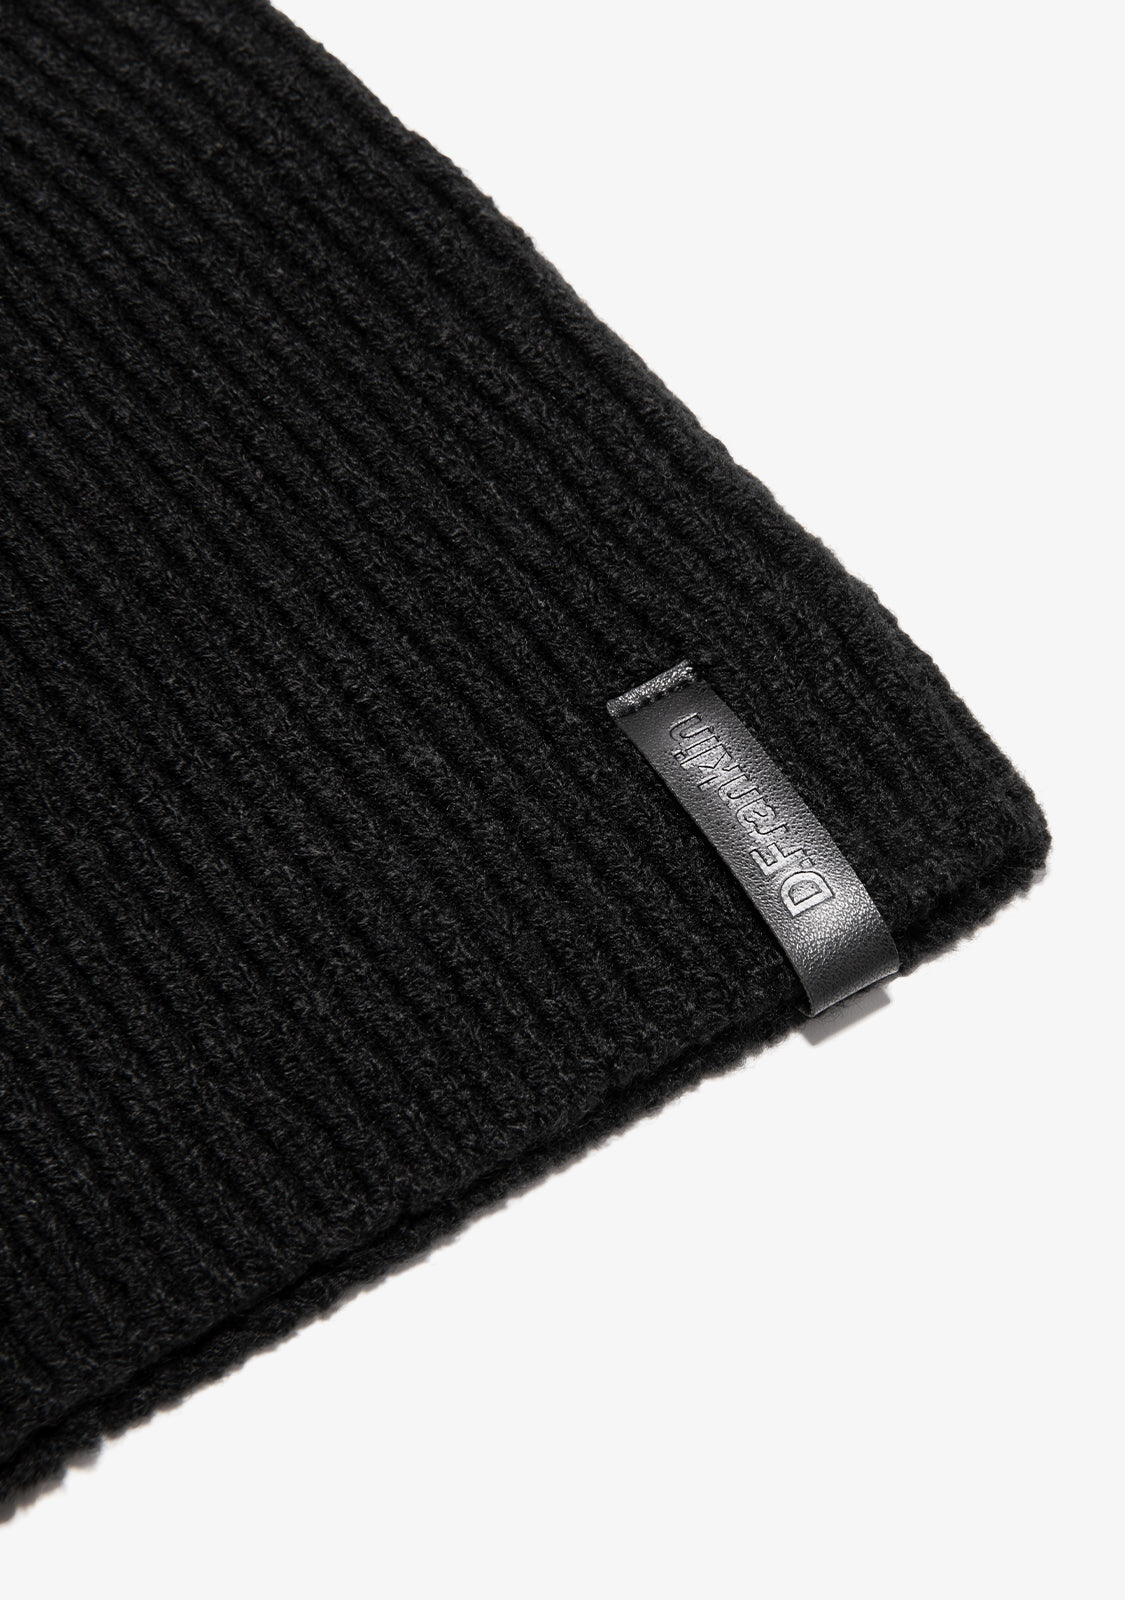 Active Slouch Beanie Black